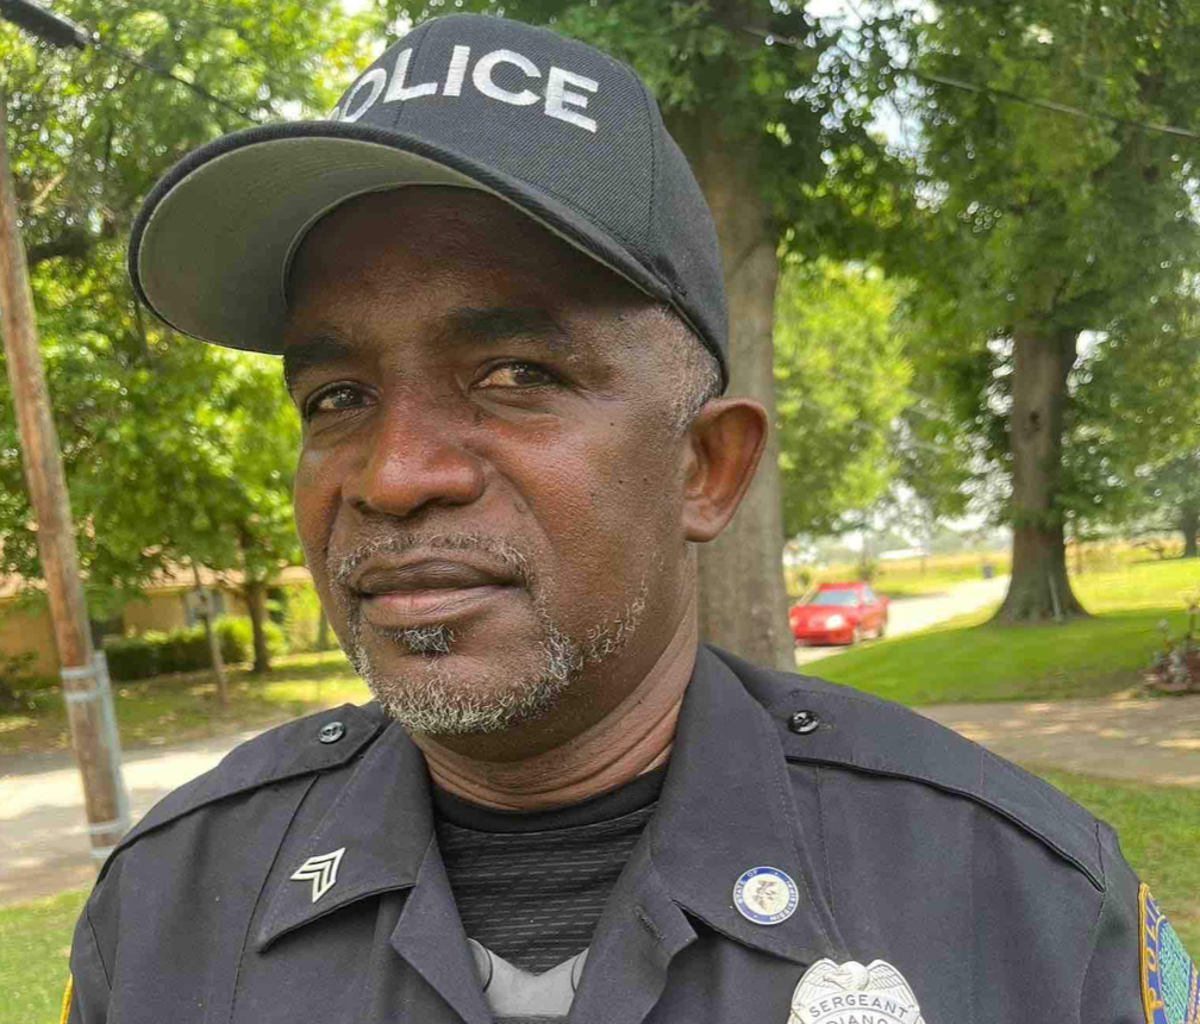 Who is Greg Capers, the Mississippi police officer who shot unarmed 11-year-old Aderrien Murry?